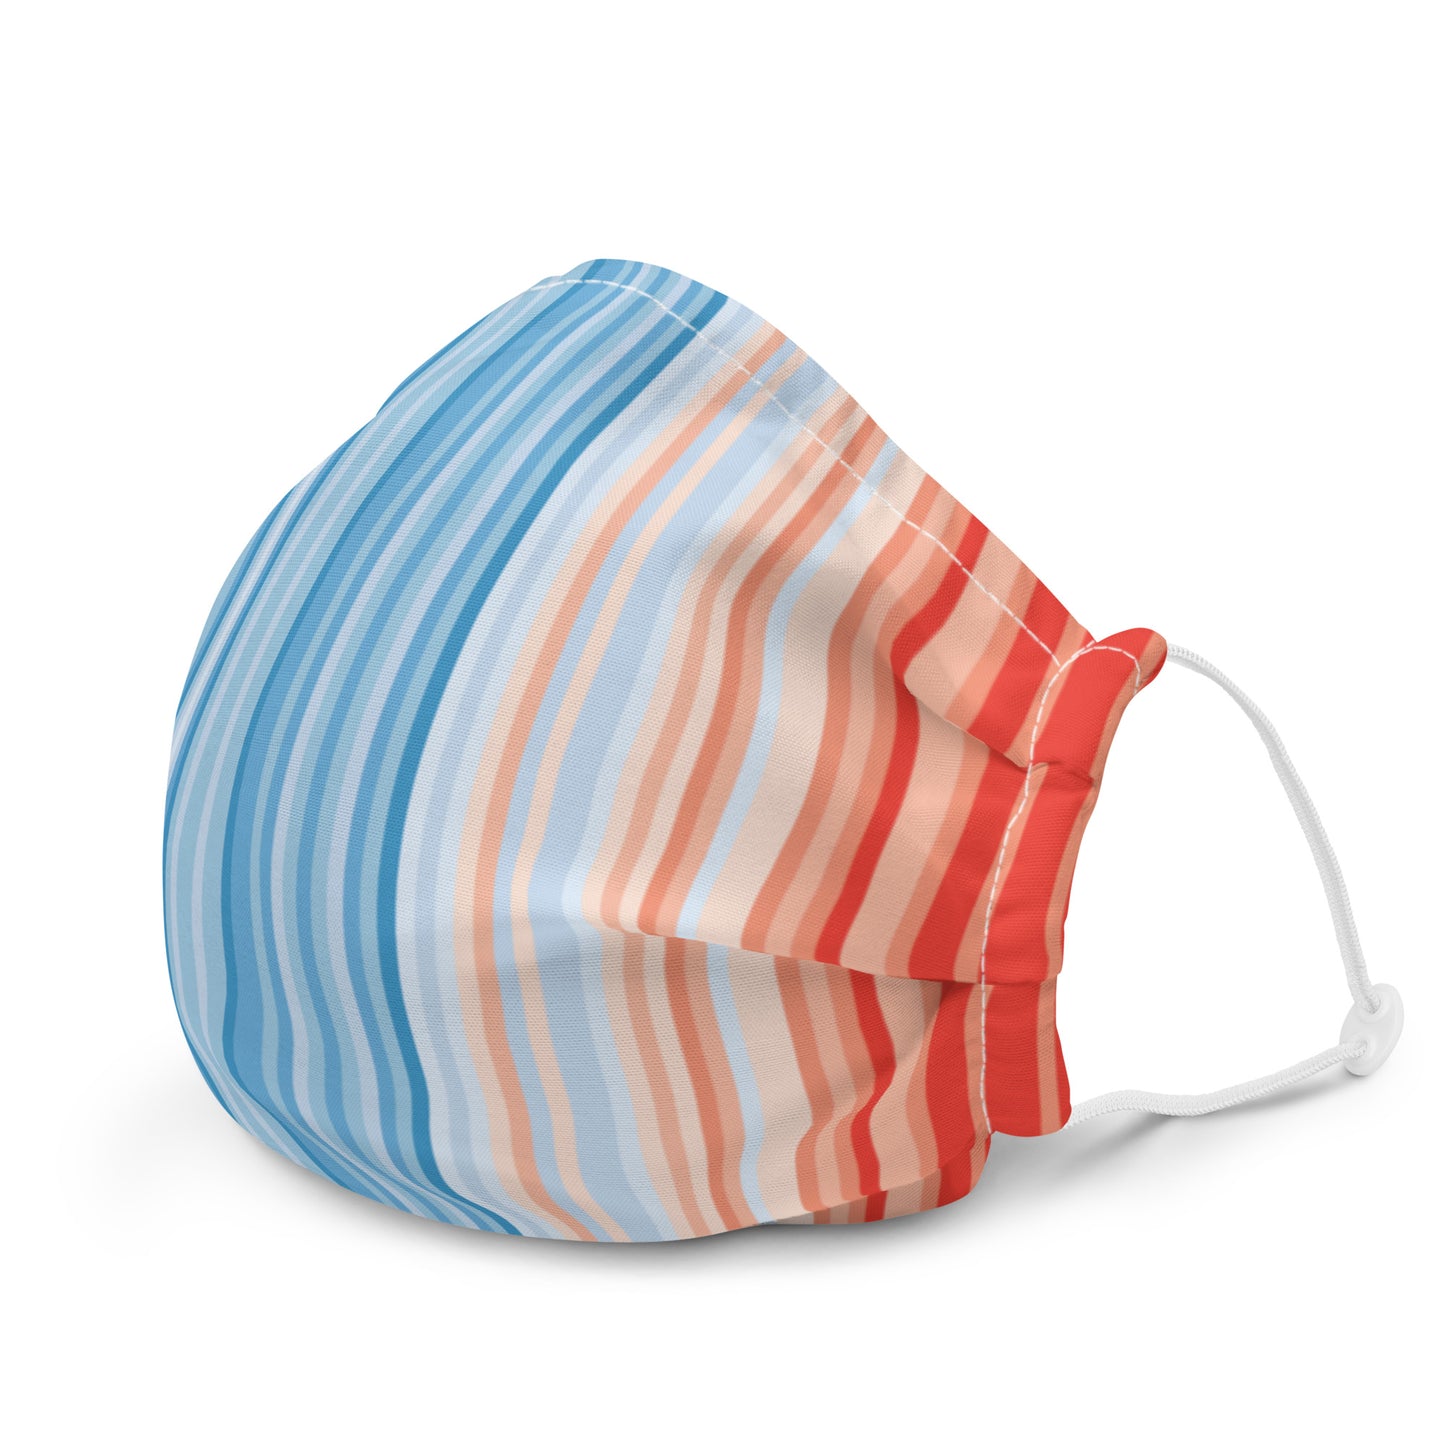 Climate Change Global Warming Stripes - Sustainably Made Premium face mask